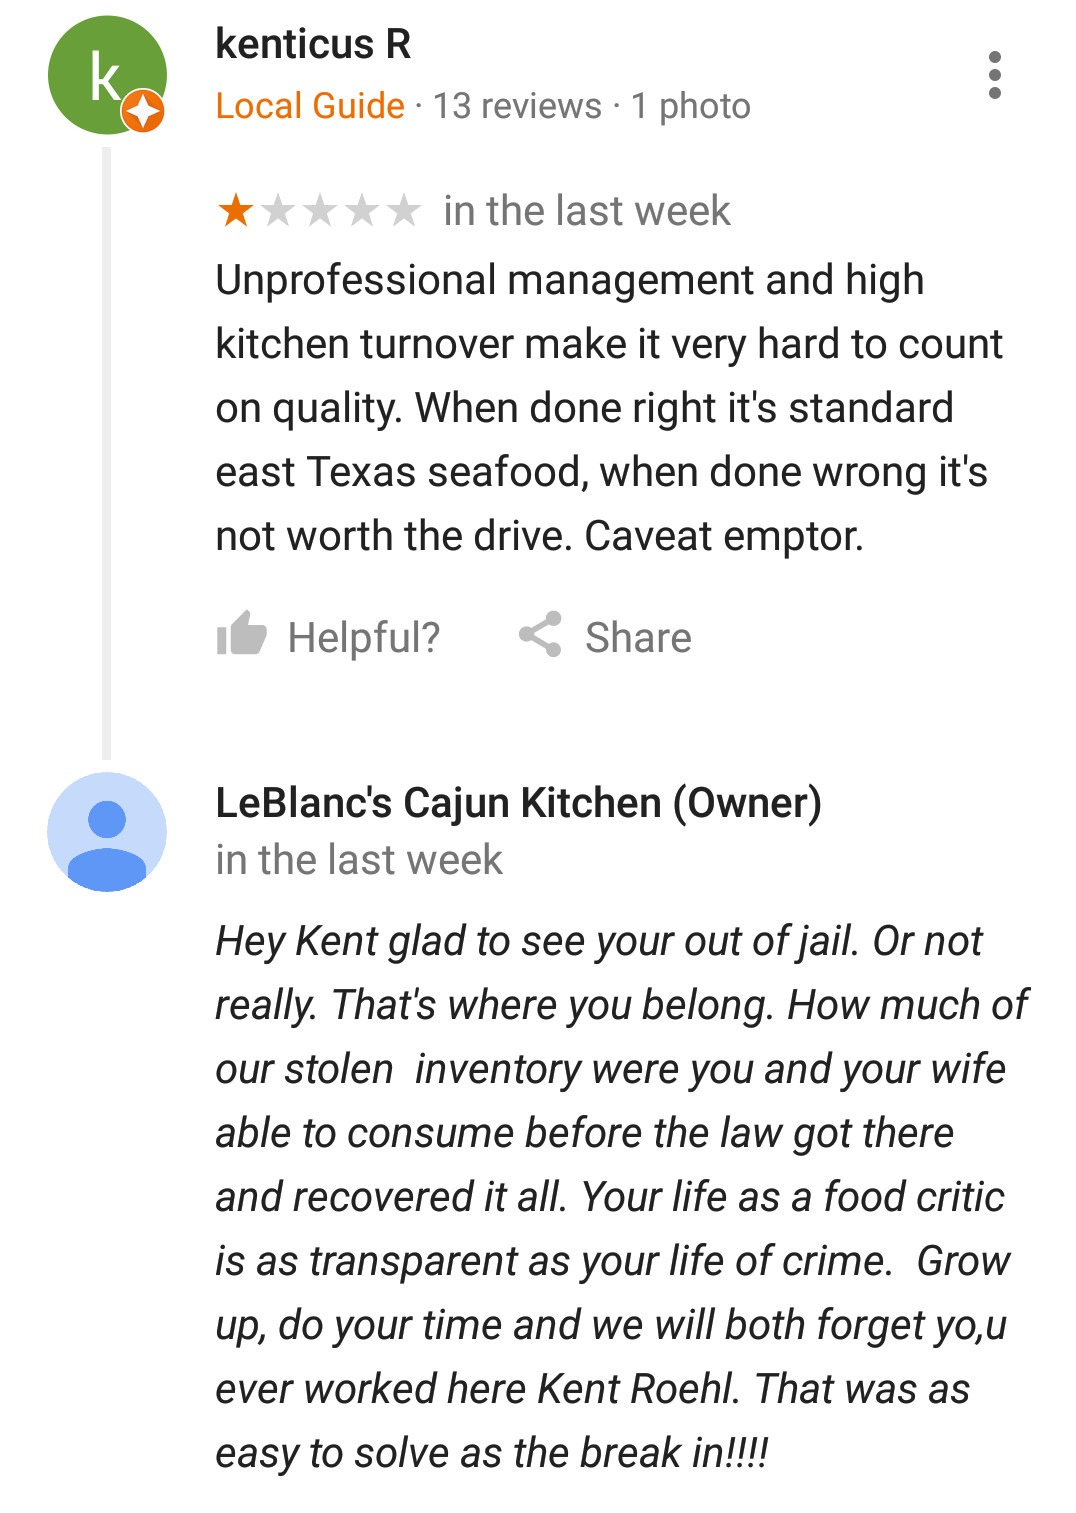 Small town restaurant reviews are the best